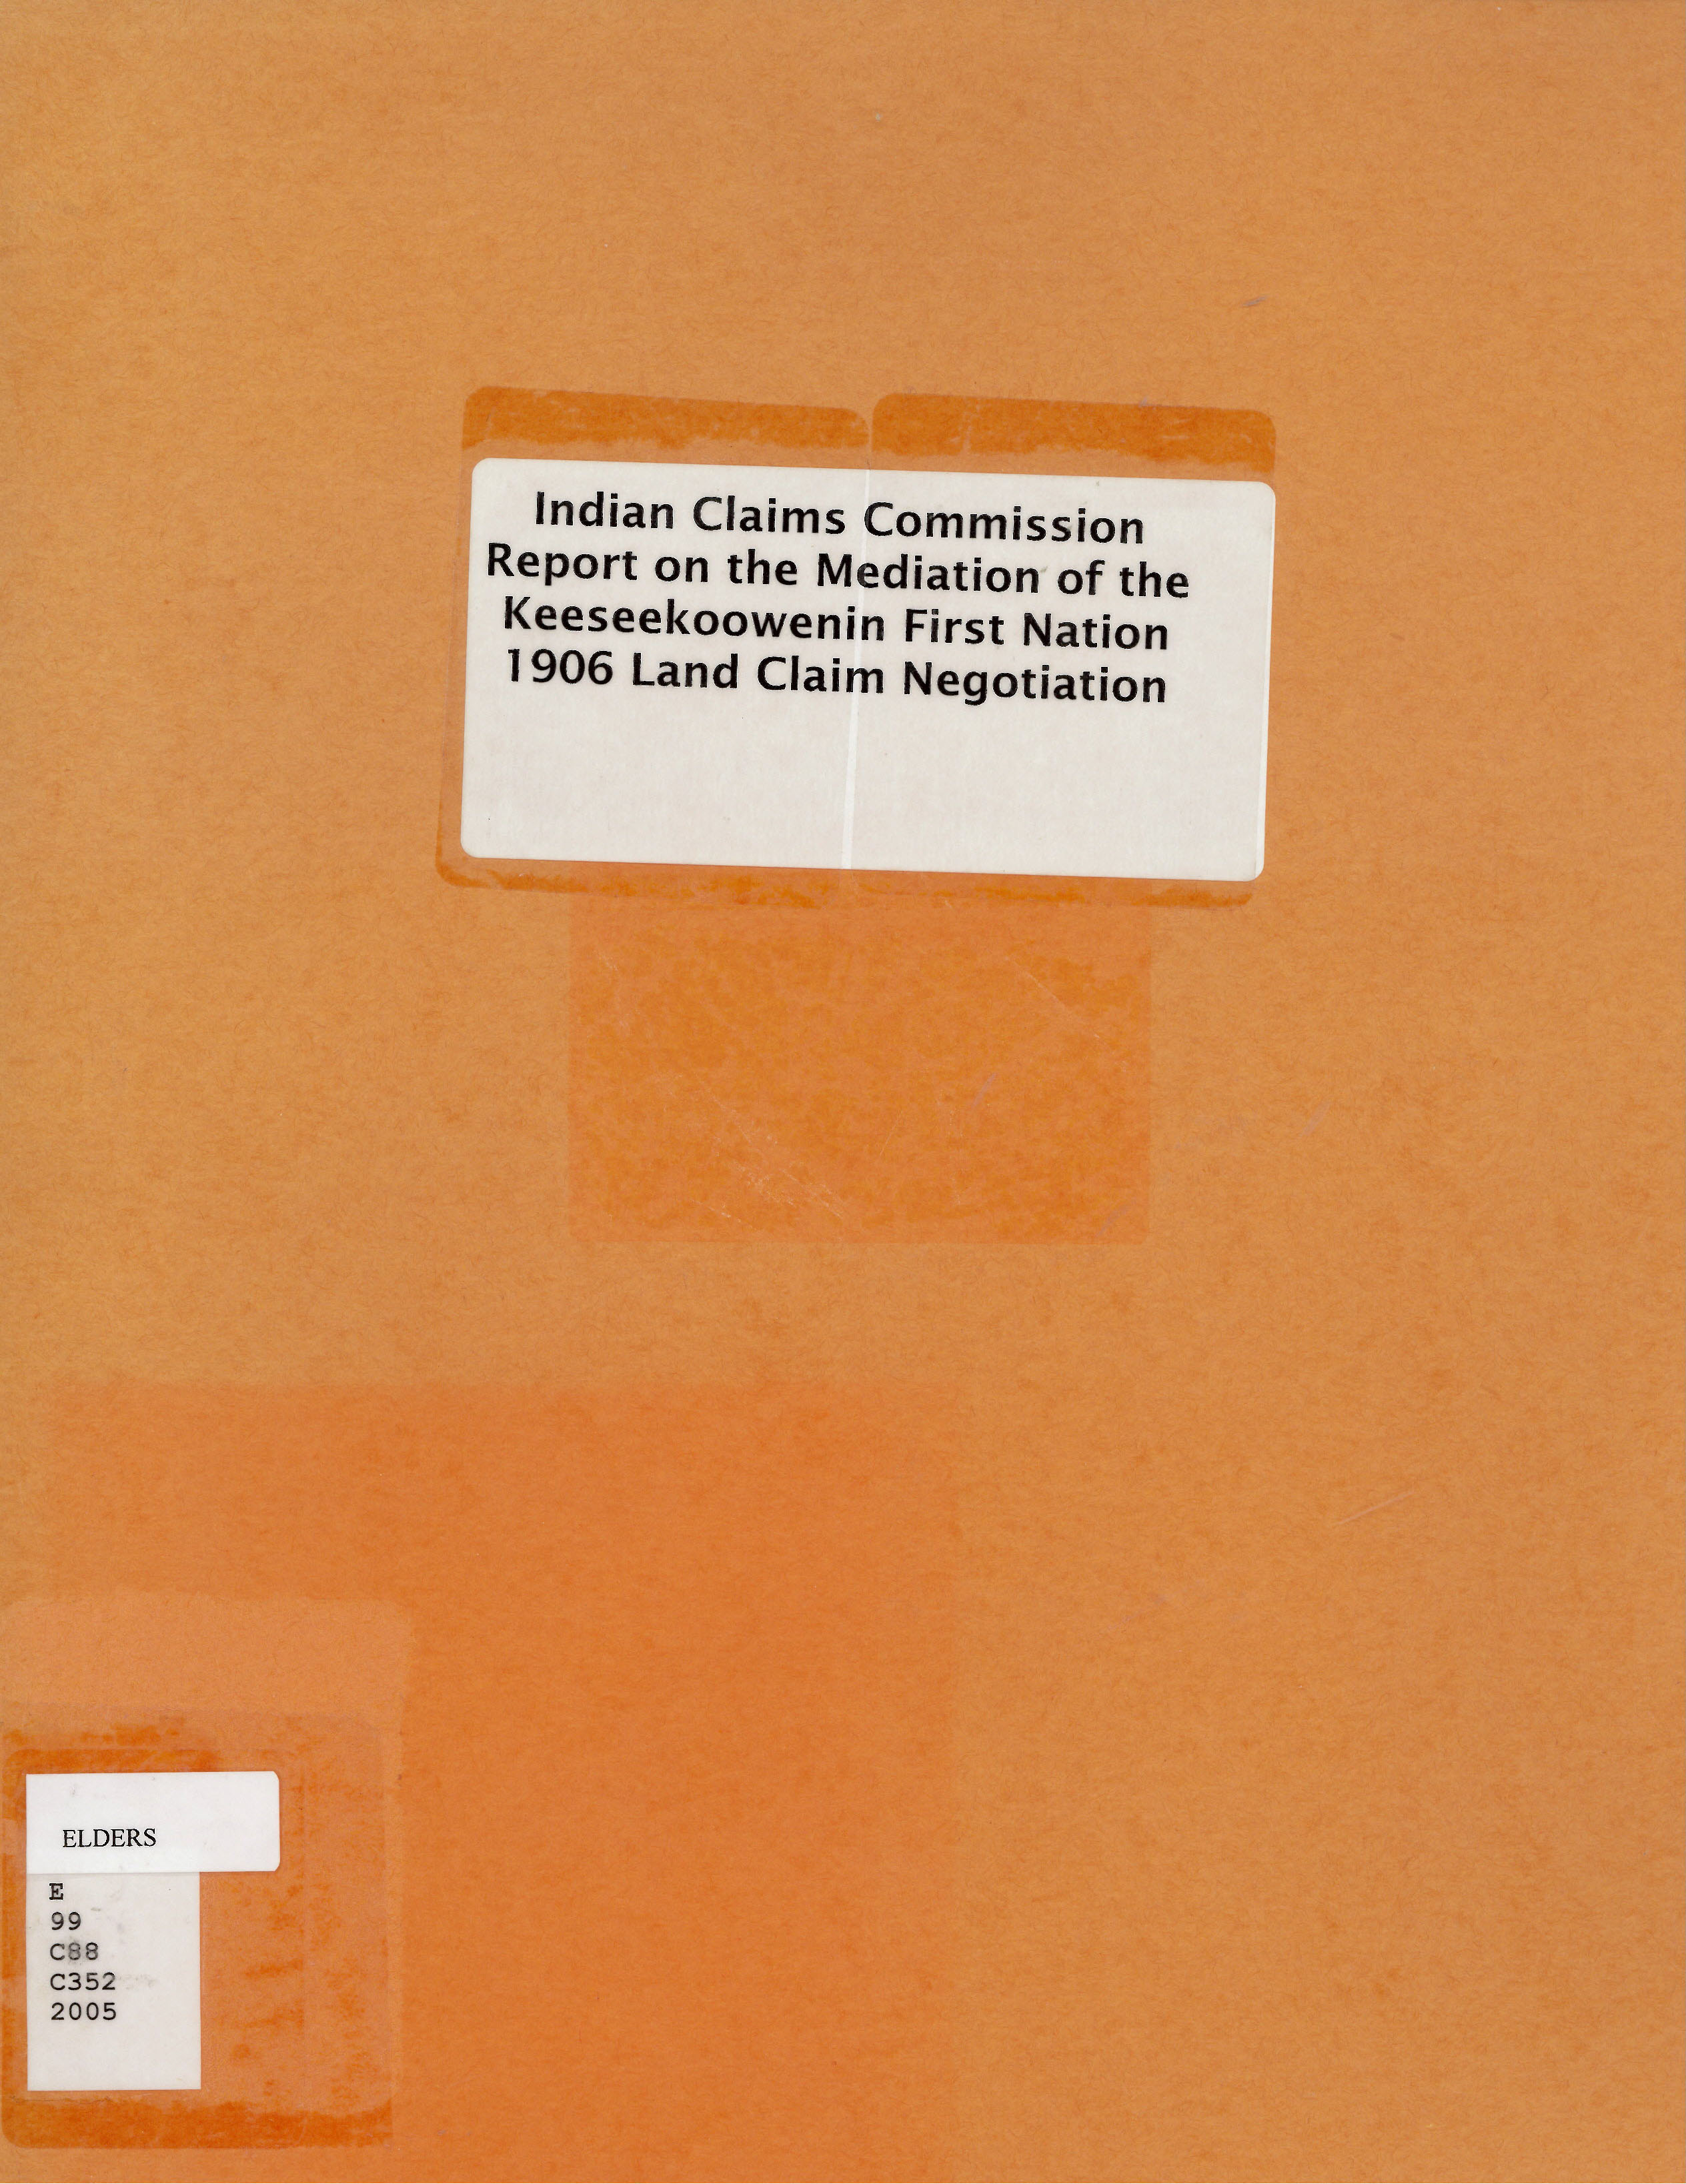 Report on the mediation of the Keeseekoowenin First Nation 1906 land claim negotiation